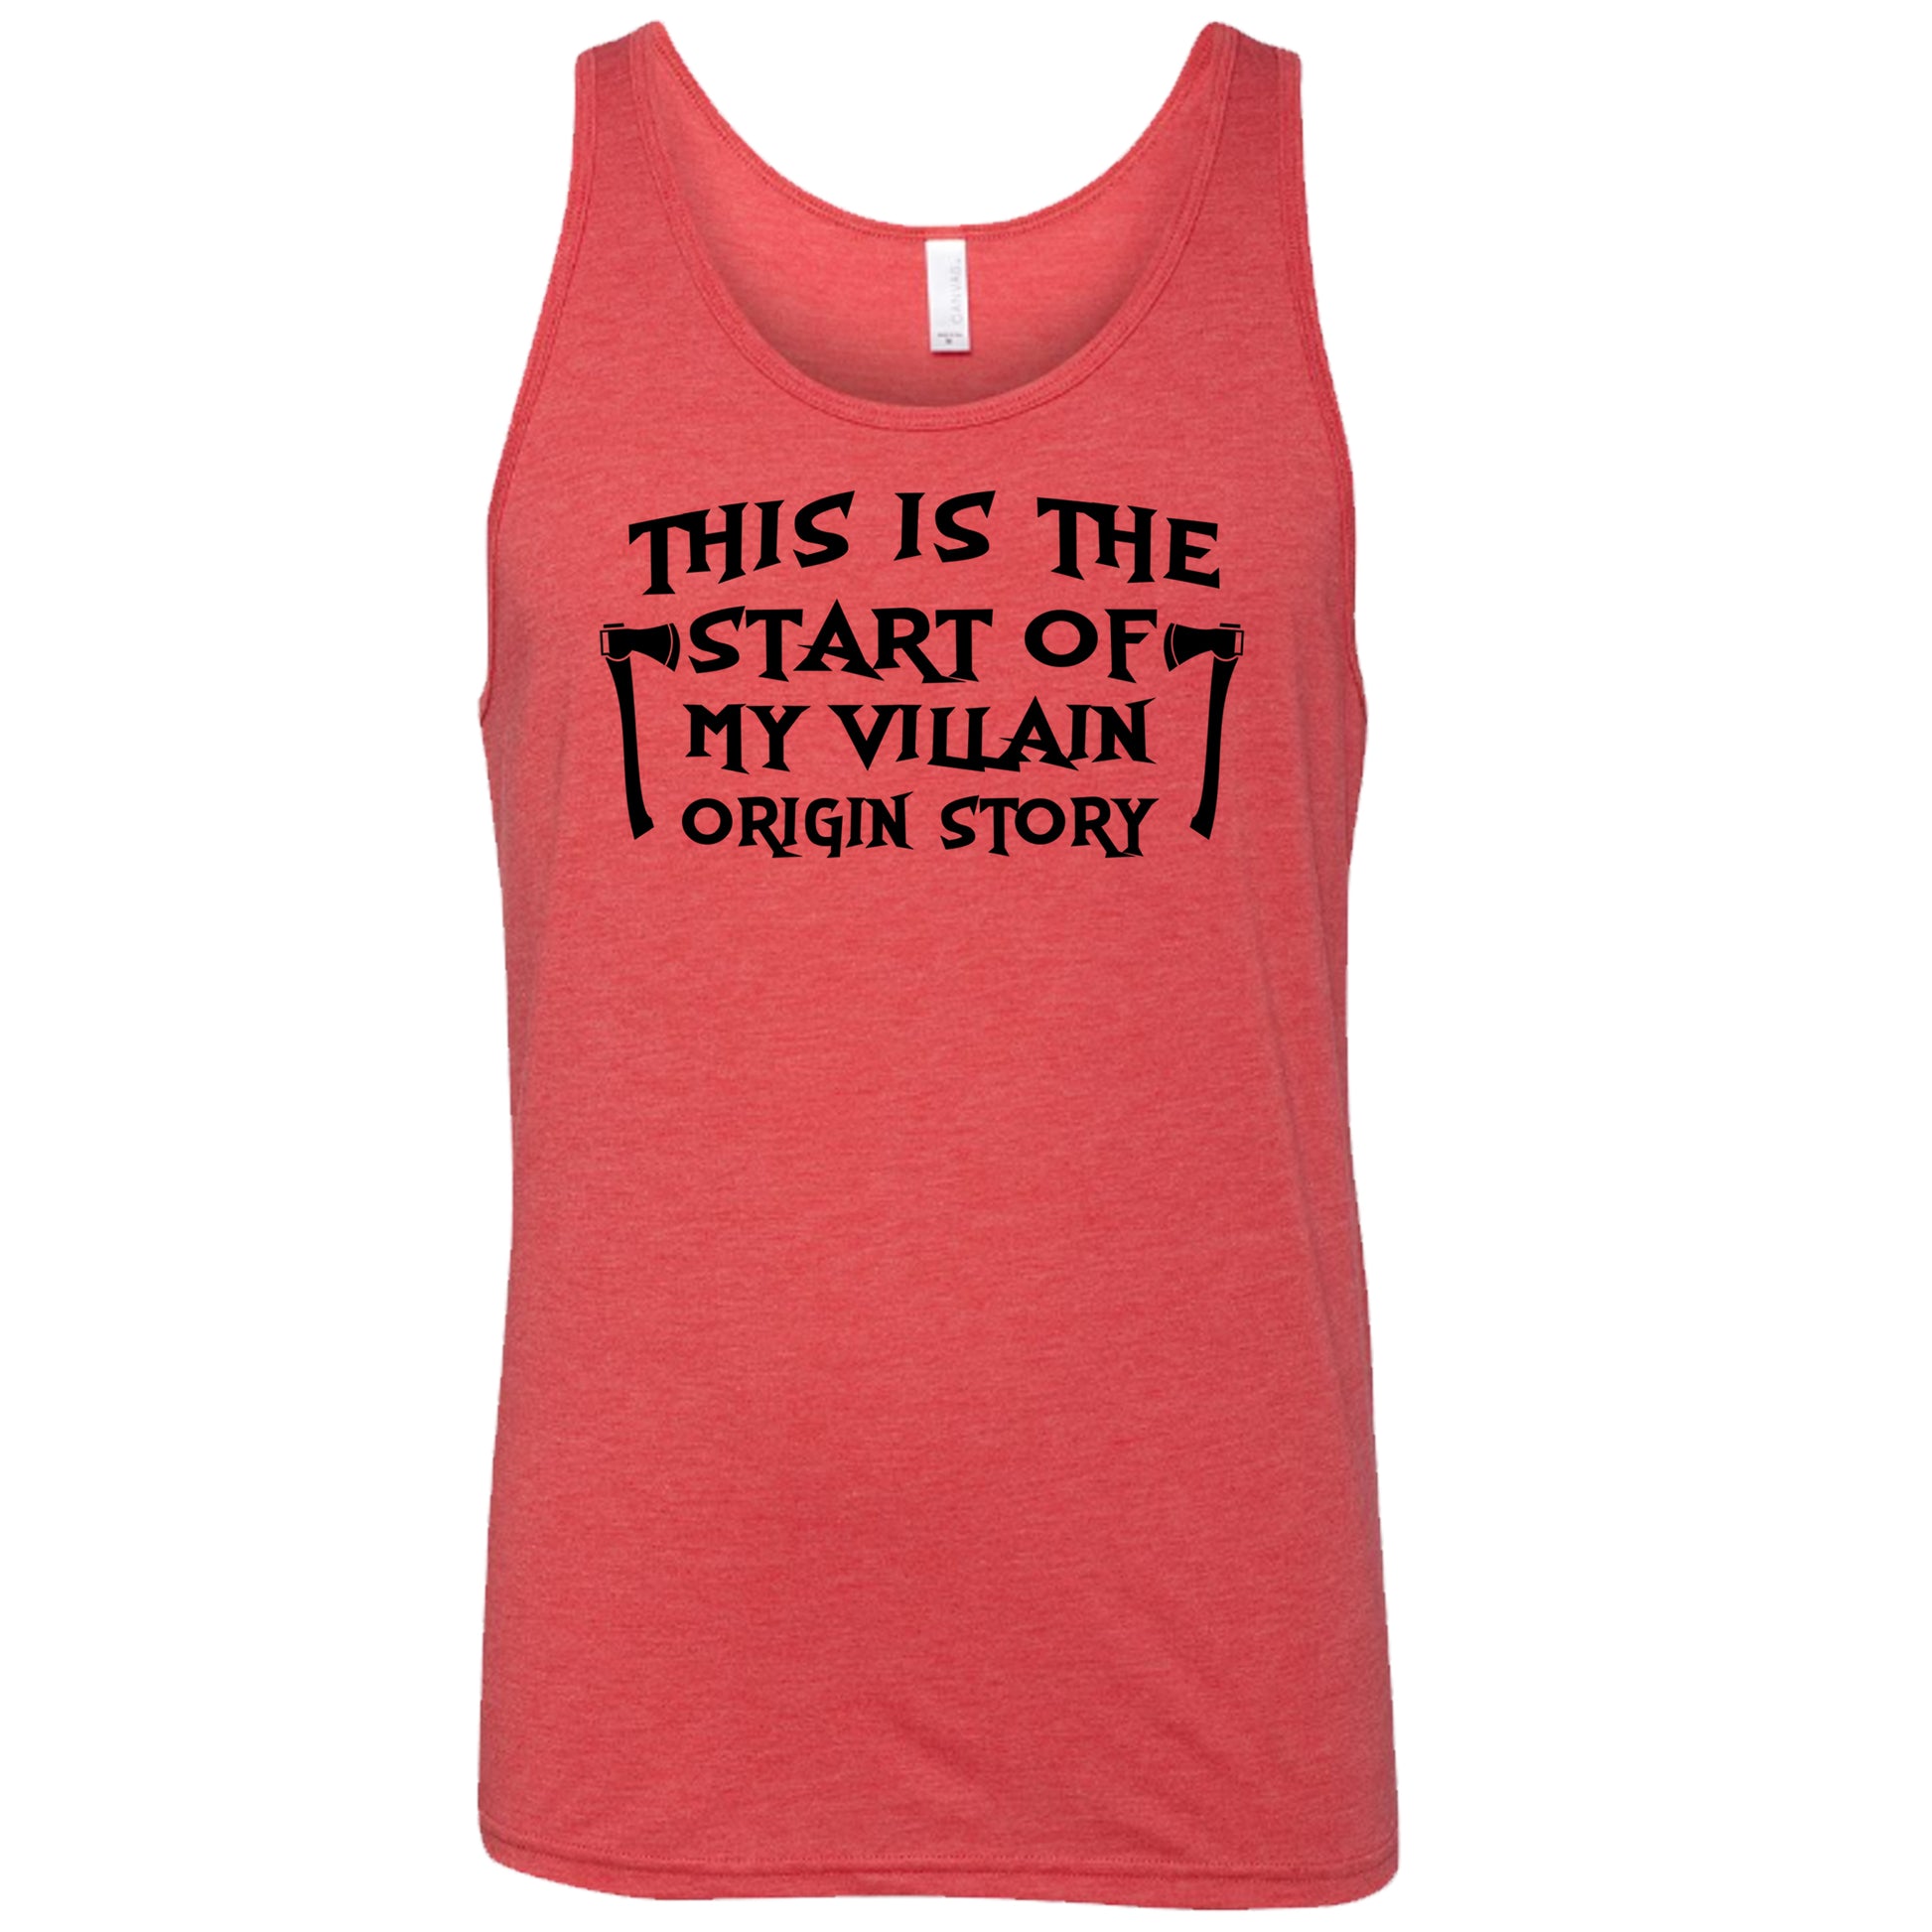 This Is The Start Of My Villain Origin Story red unisex tank top